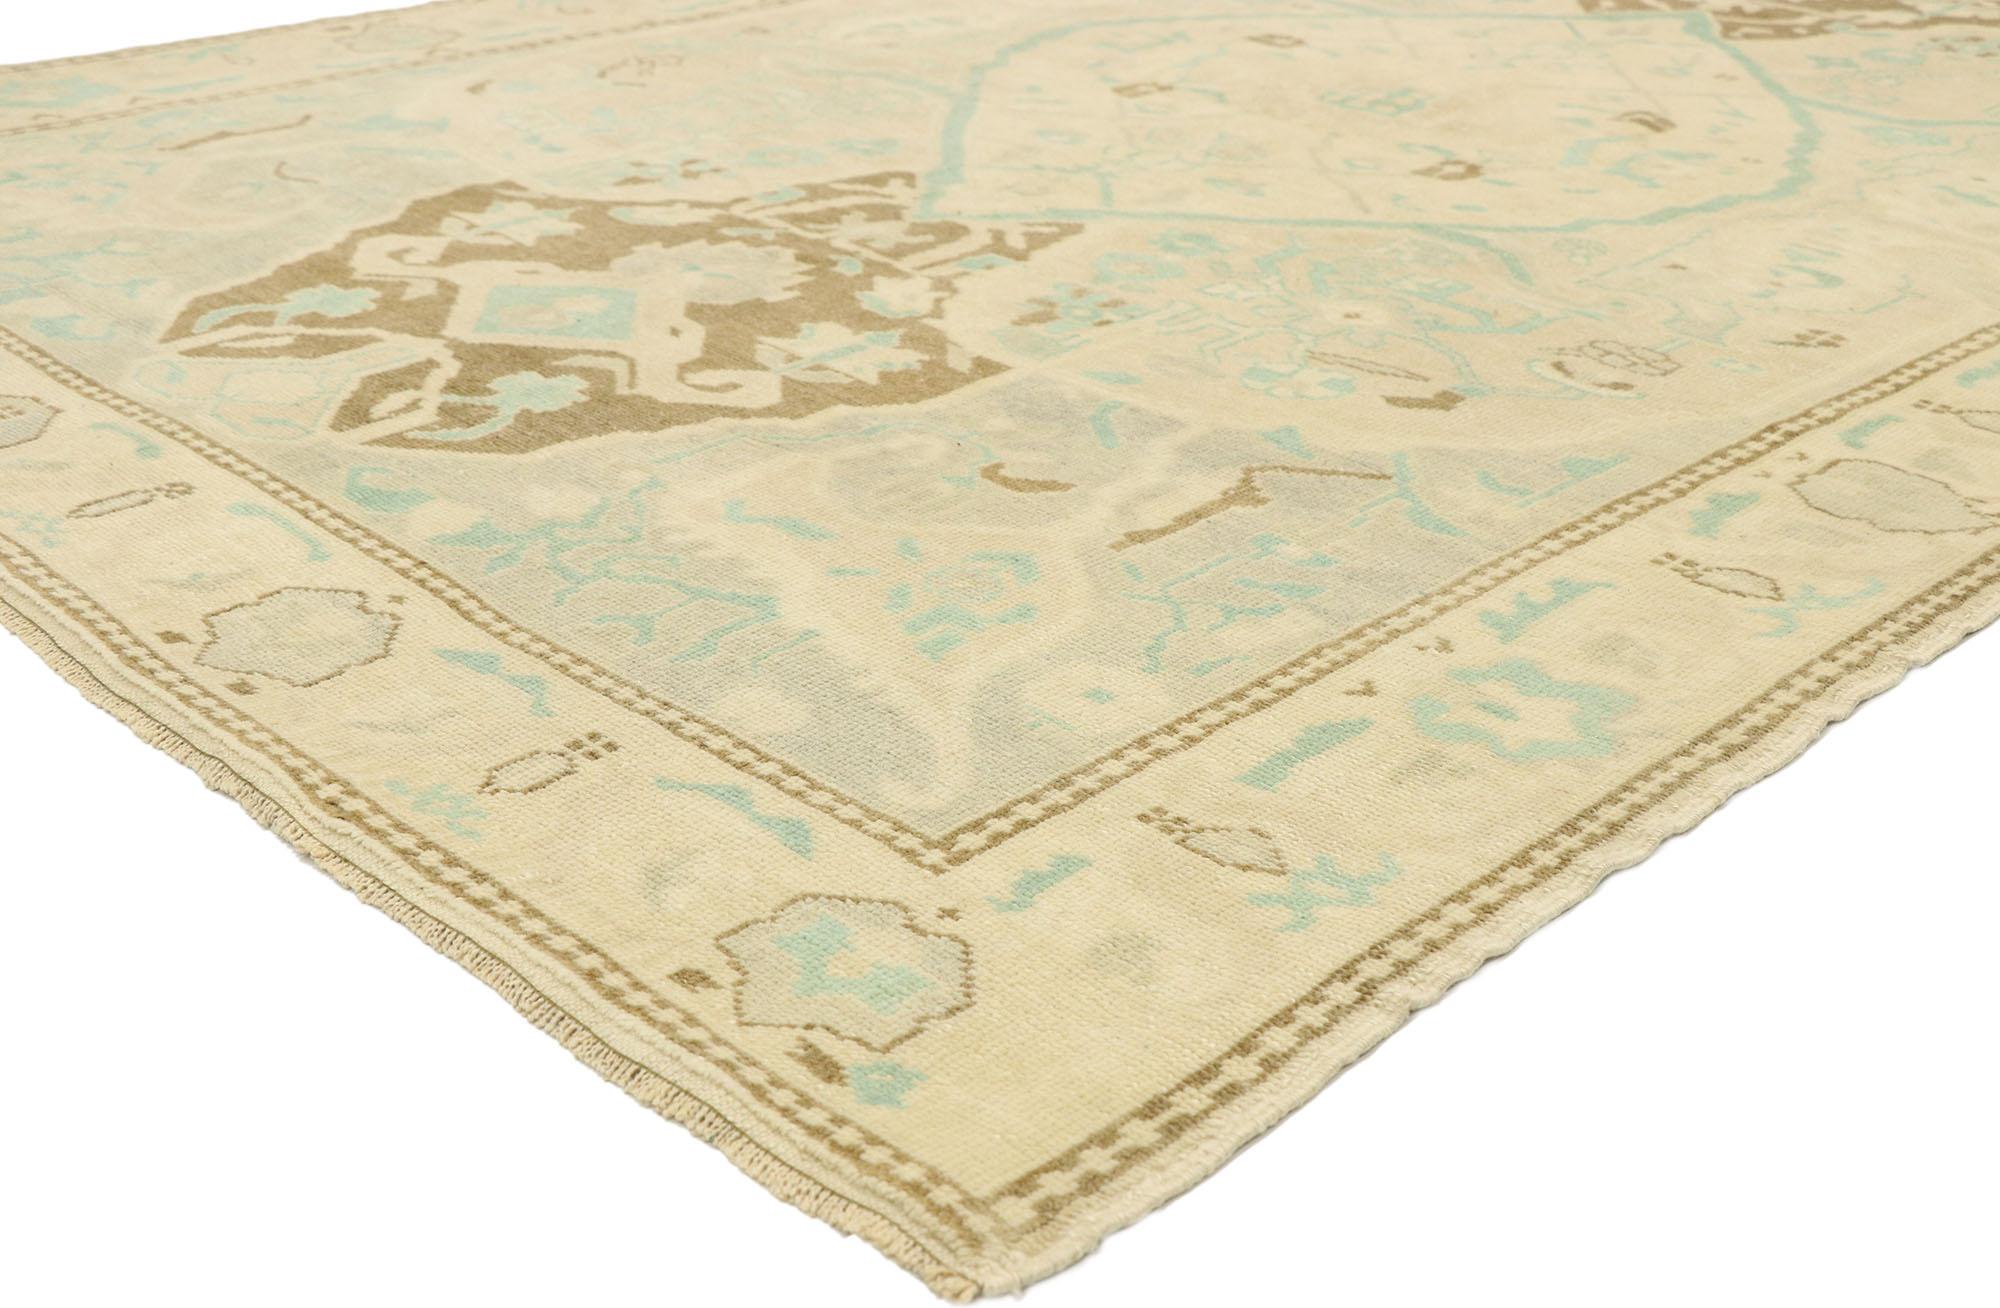 52965 vintage Turkish Oushak rug with Swedish Gustavian Cottage style 05'08 x 08'07. Balancing Swedish simplicity with Gustavian grace, this hand knotted wool vintage Turkish Oushak rug displays nostalgic charm and inimitable warmth. The abrashed